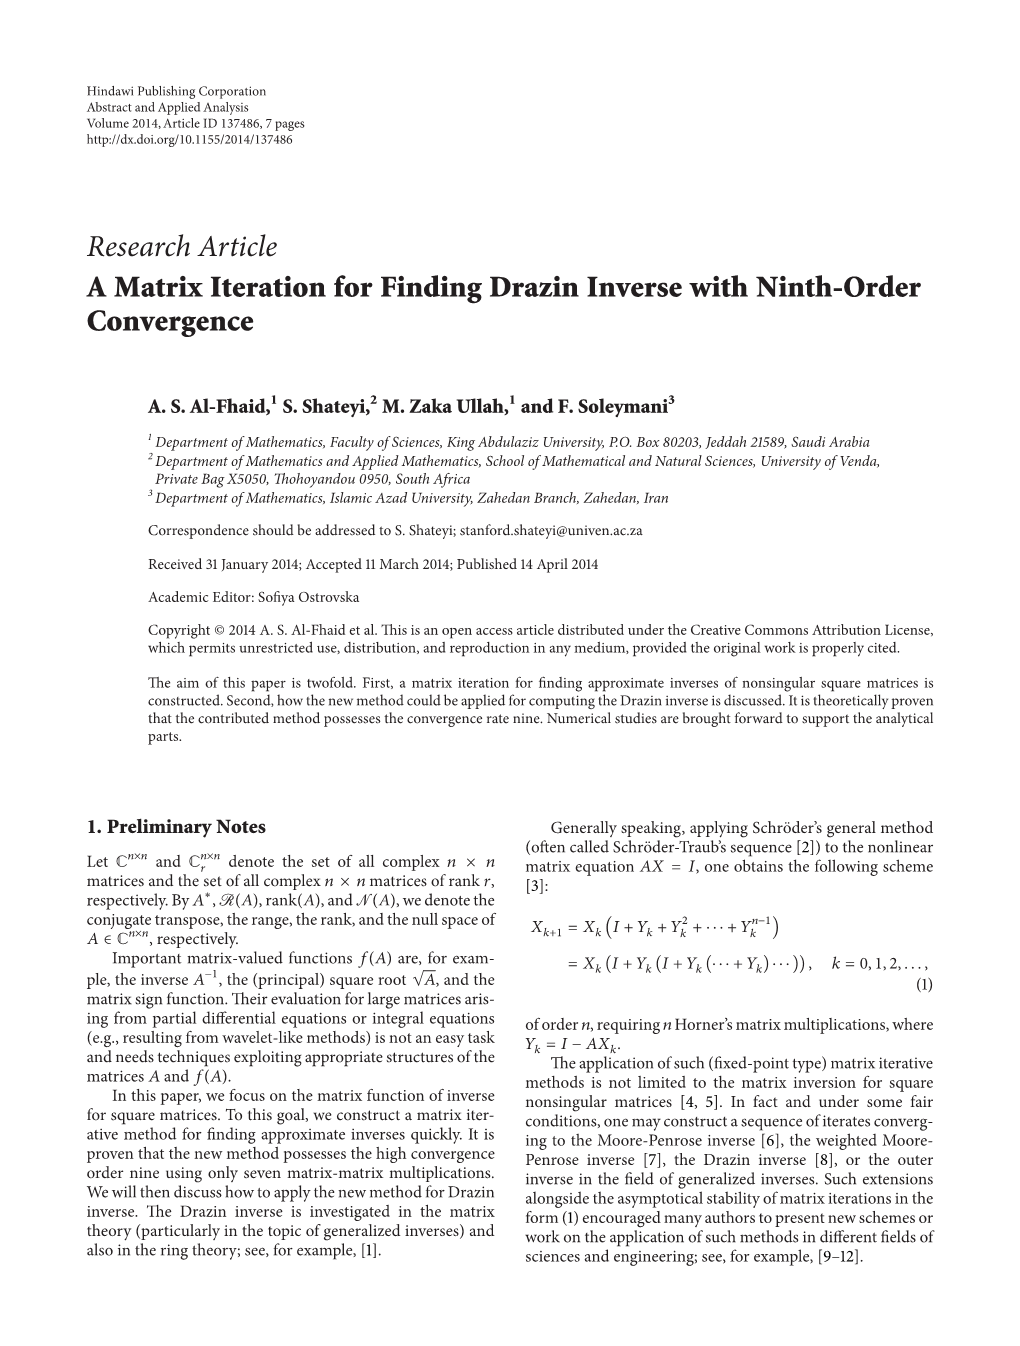 A Matrix Iteration for Finding Drazin Inverse with Ninth-Order Convergence